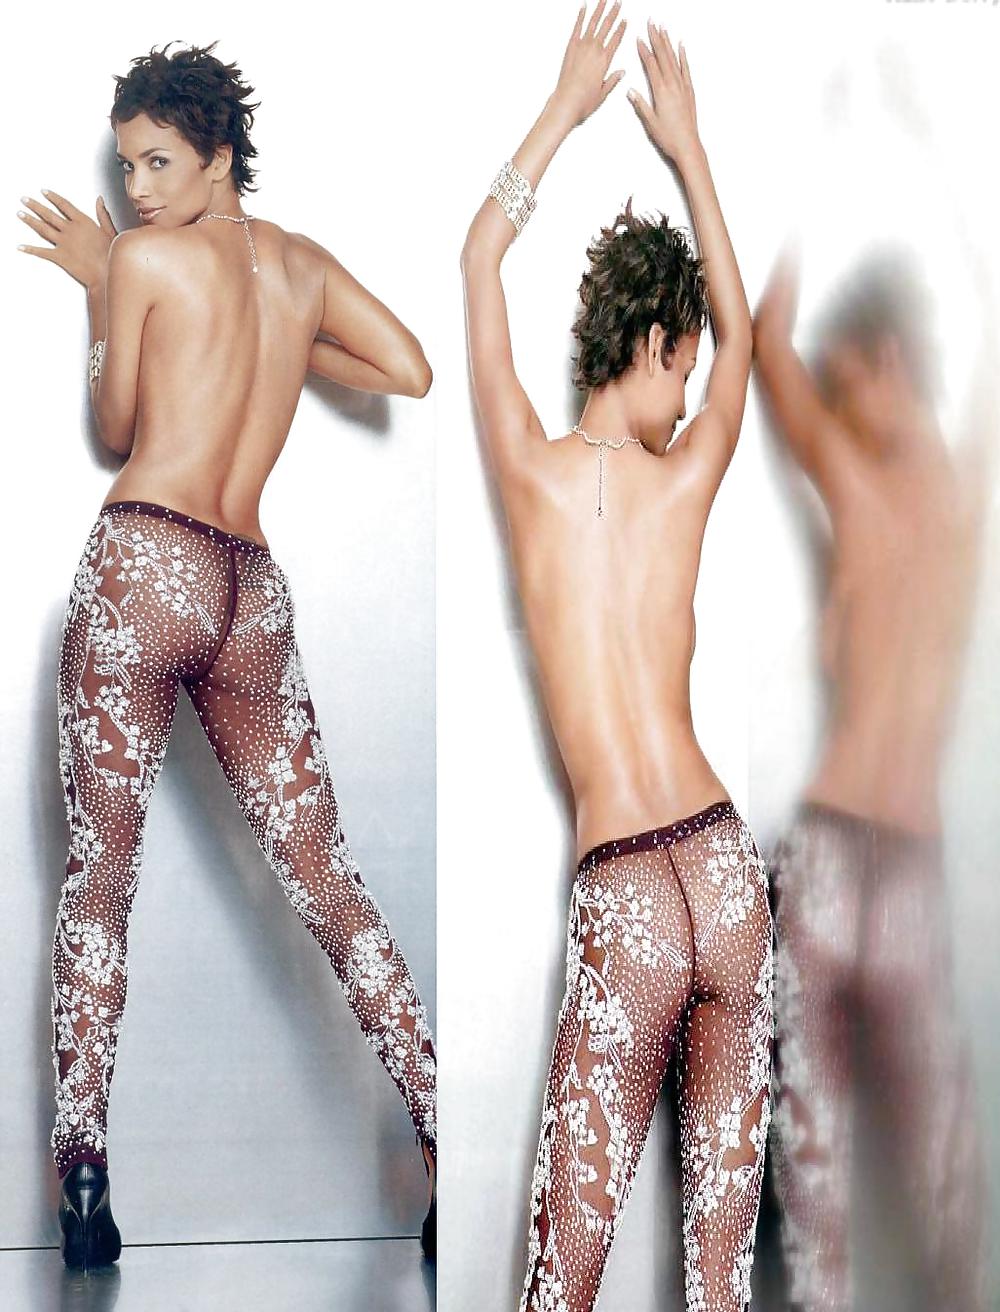 Halle berry ultimate glamour, scollatura, tappi
 #8353494